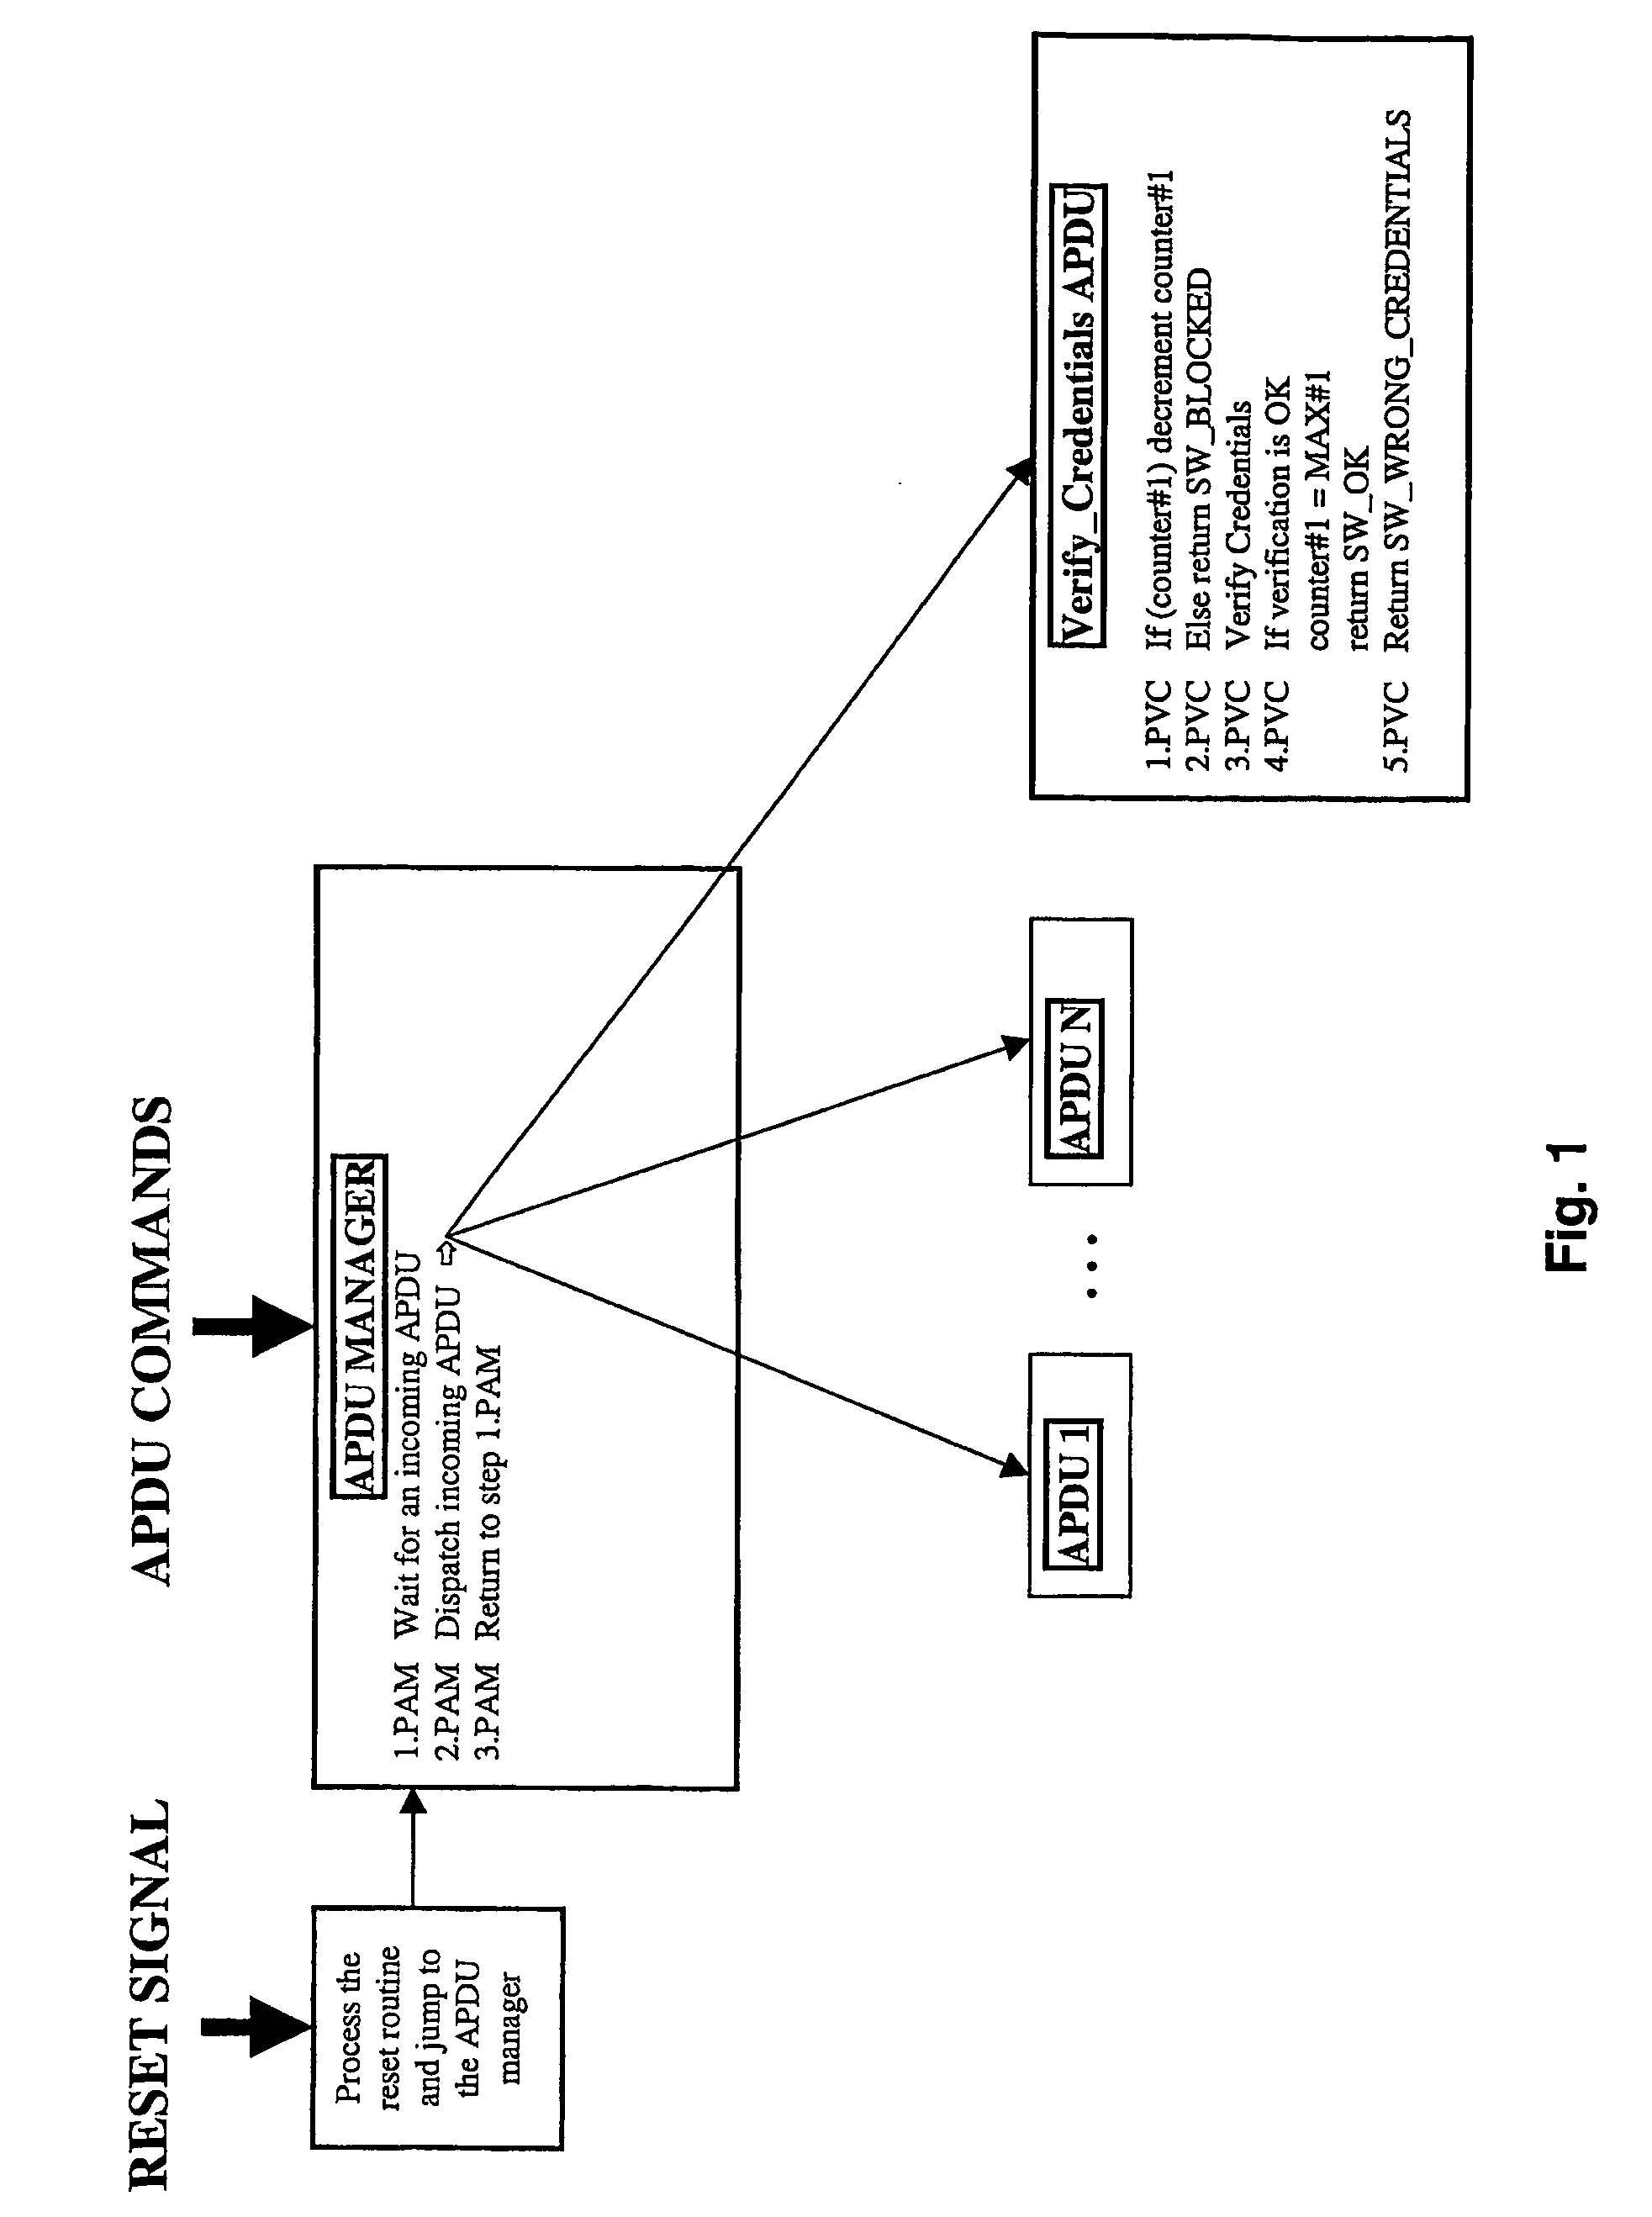 Protection of a portable object against denial of service type attacks